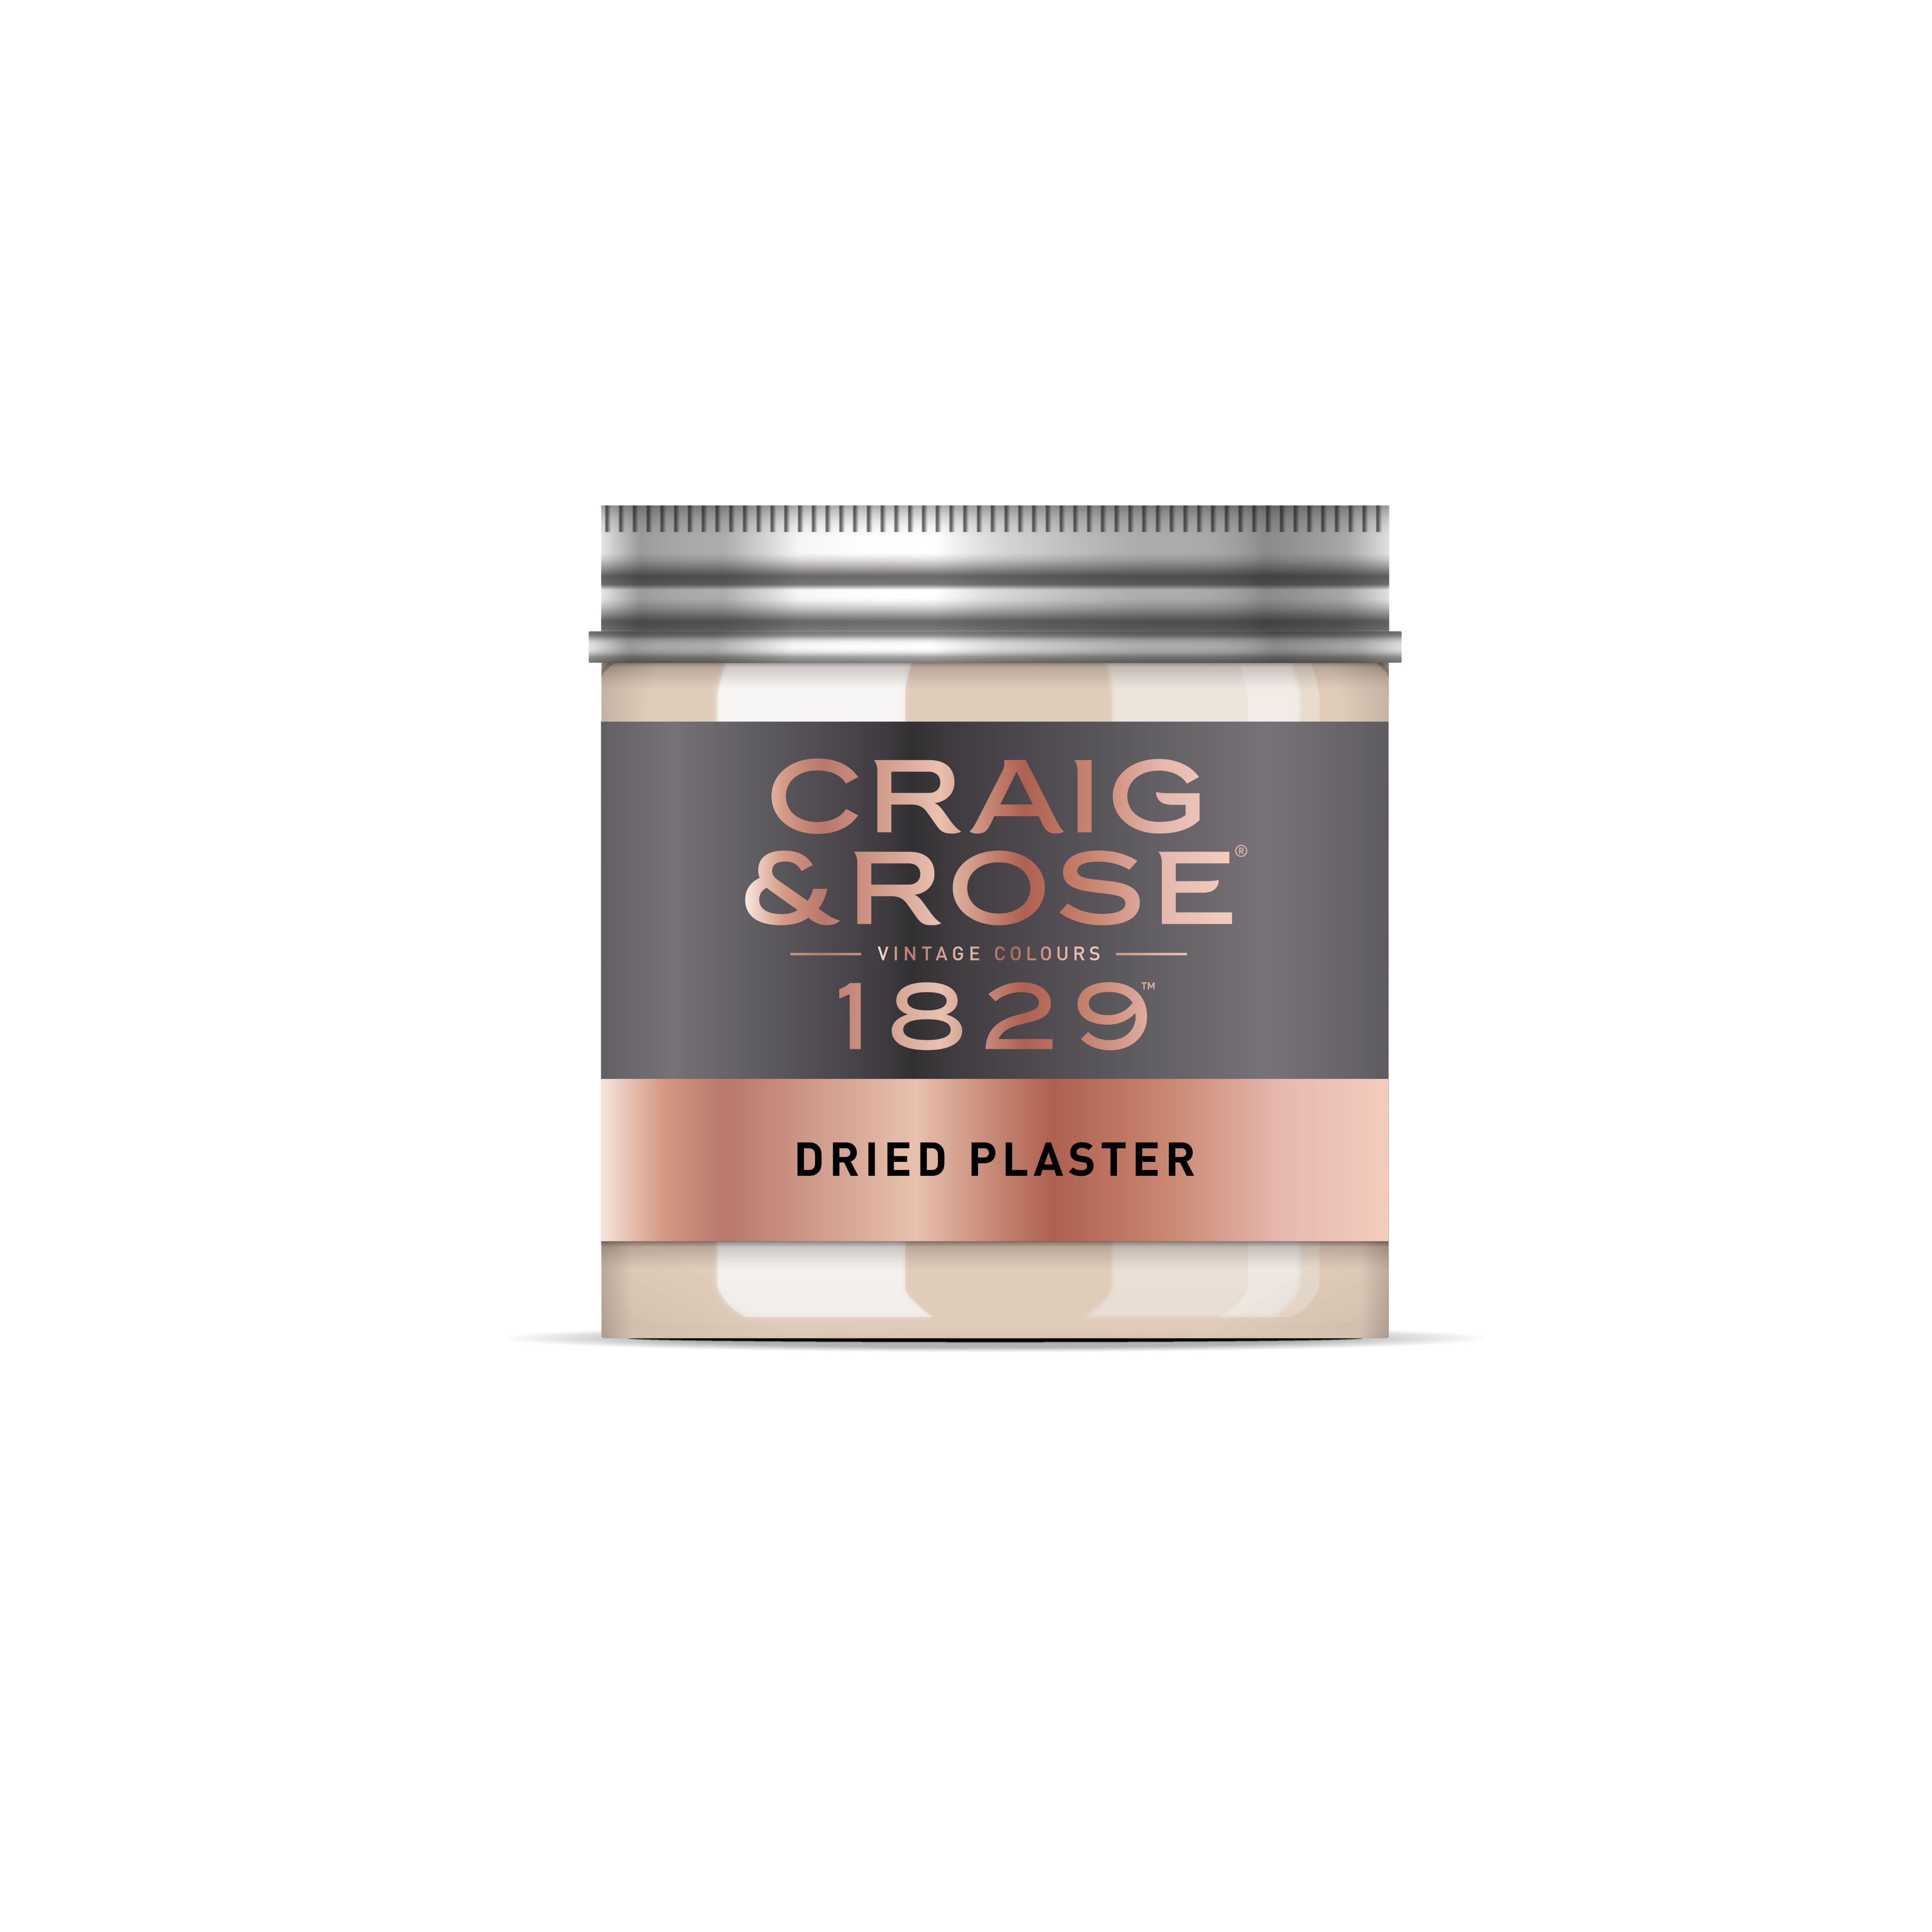 Craig & Rose 1829 Dried Plaster Chalky Emulsion paint, 50ml